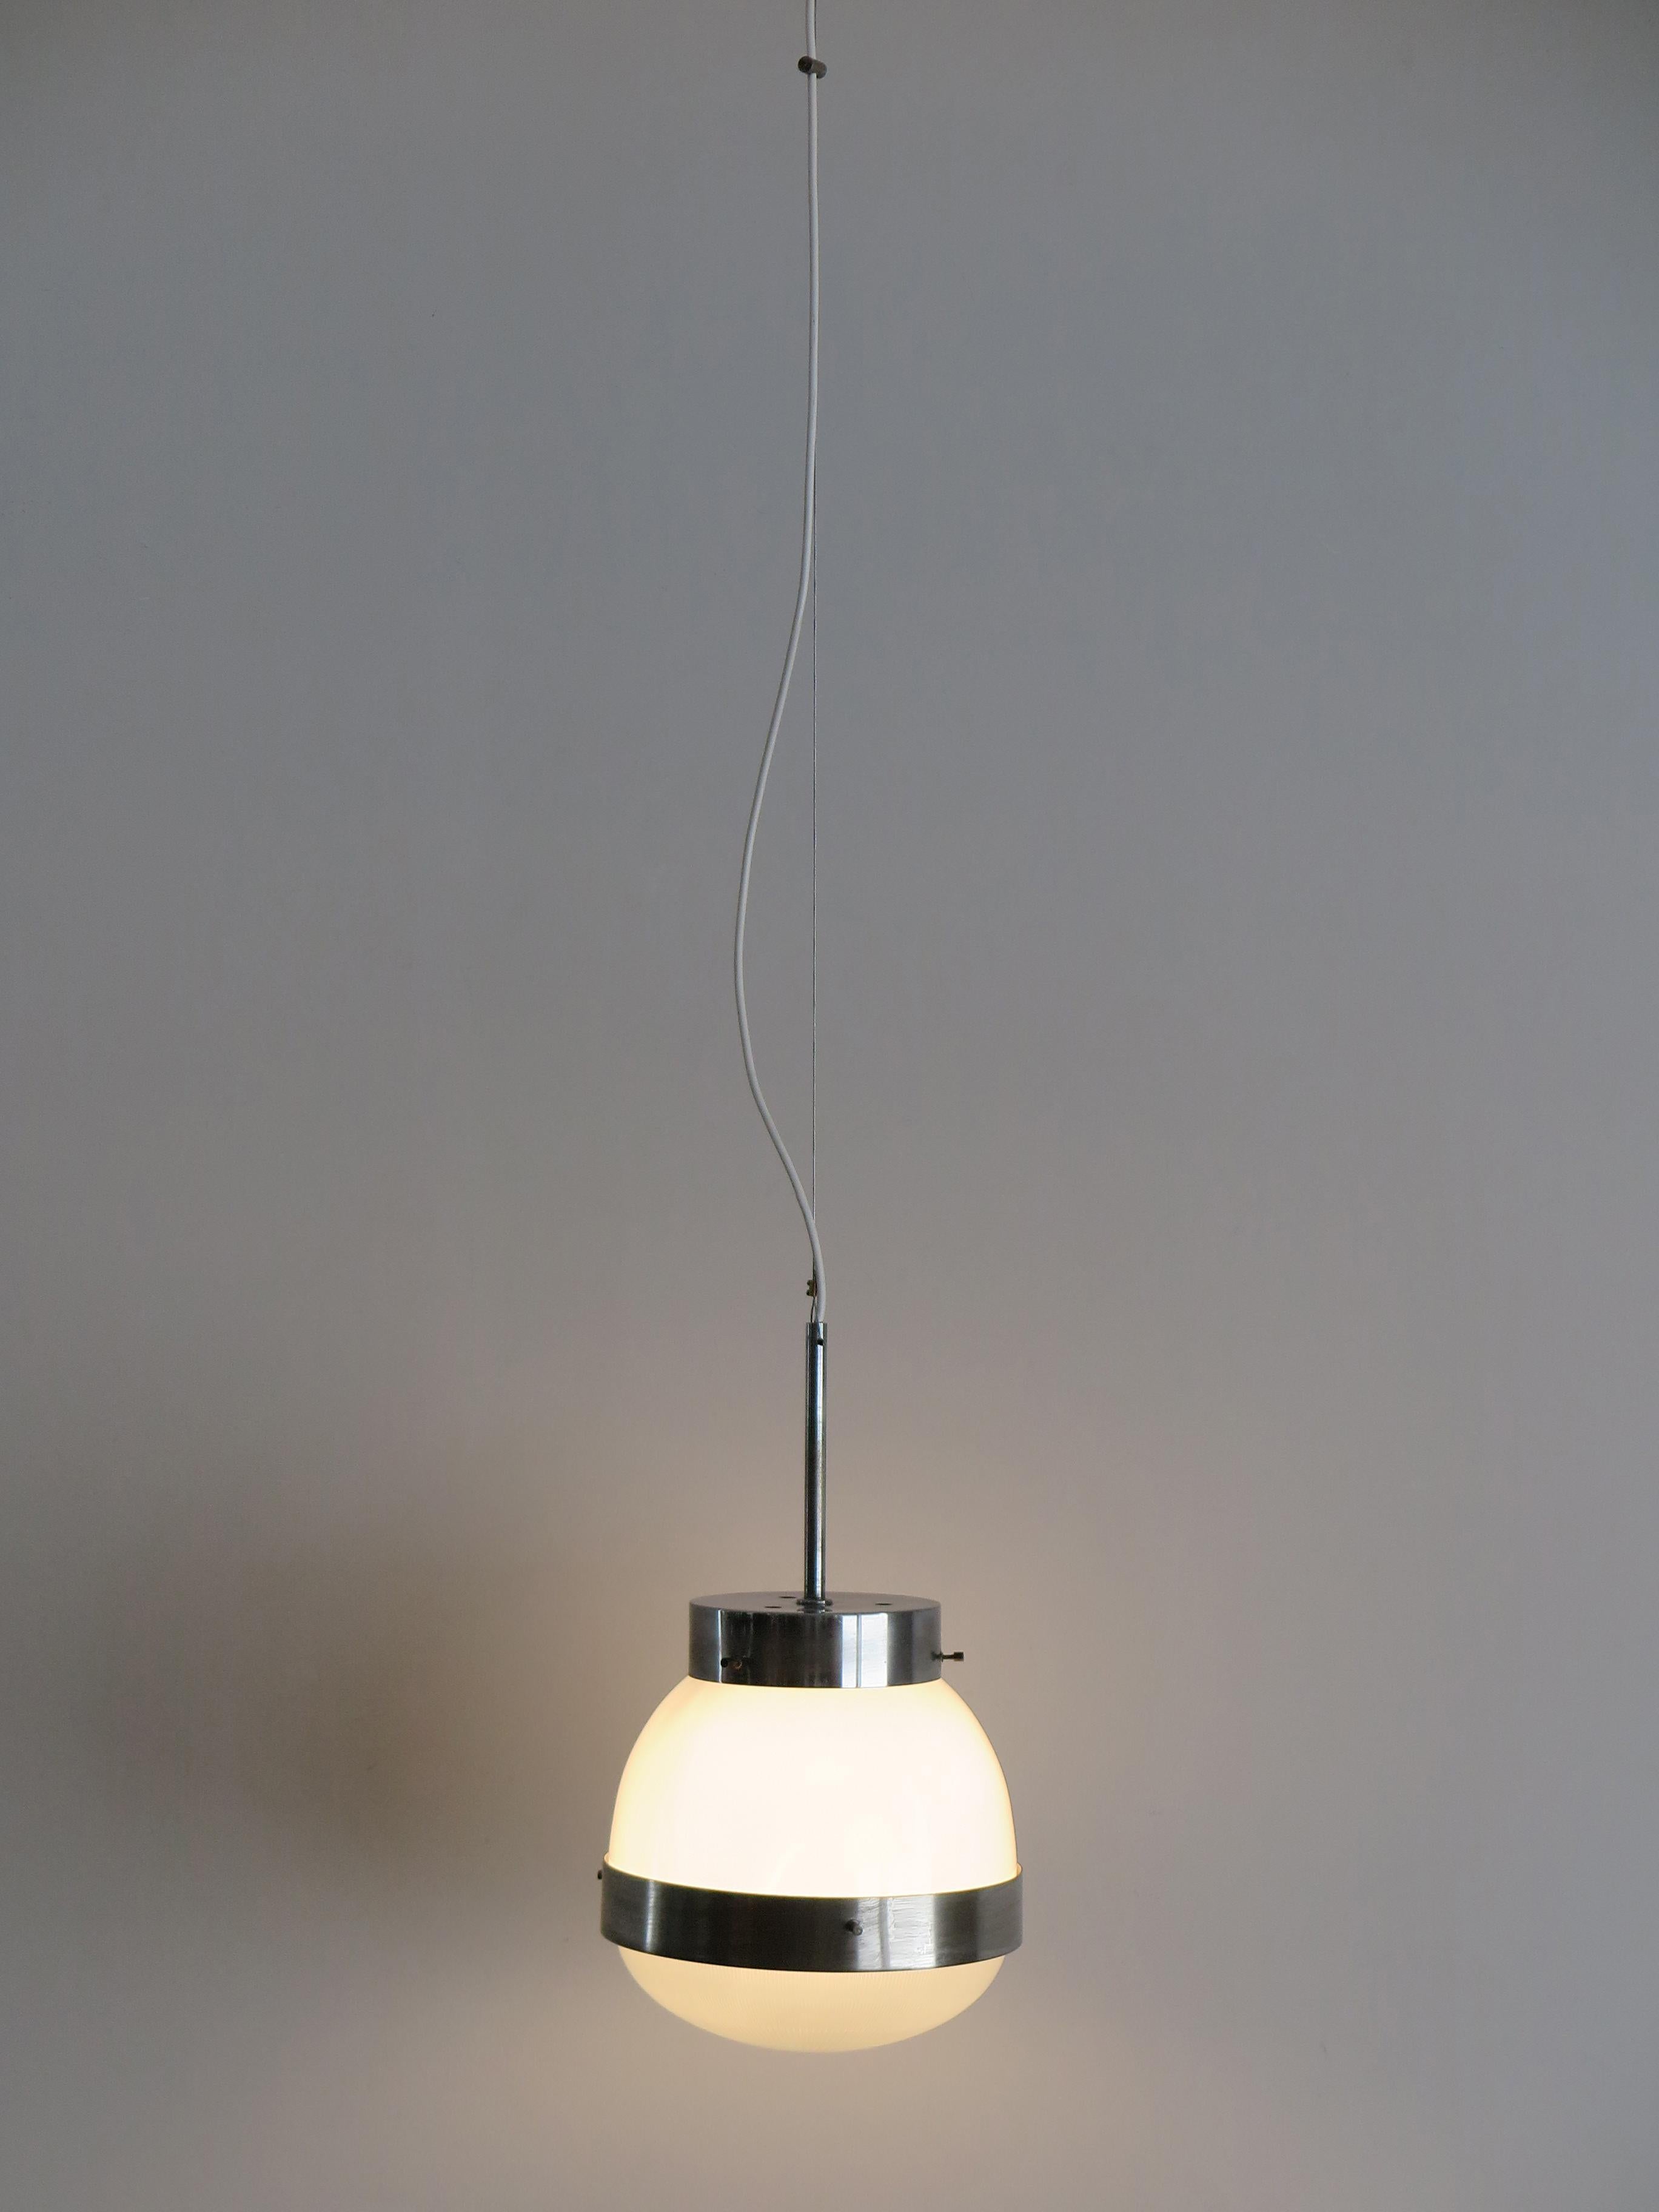 Italian Mid-Century Modern design pendant lamp model Delta designed by Sergio Mazza and produced by Artemide; chromed metal, opal glass and pressed glass, circa 1960s.

Please note that the lamp is original of the period and this shows normal